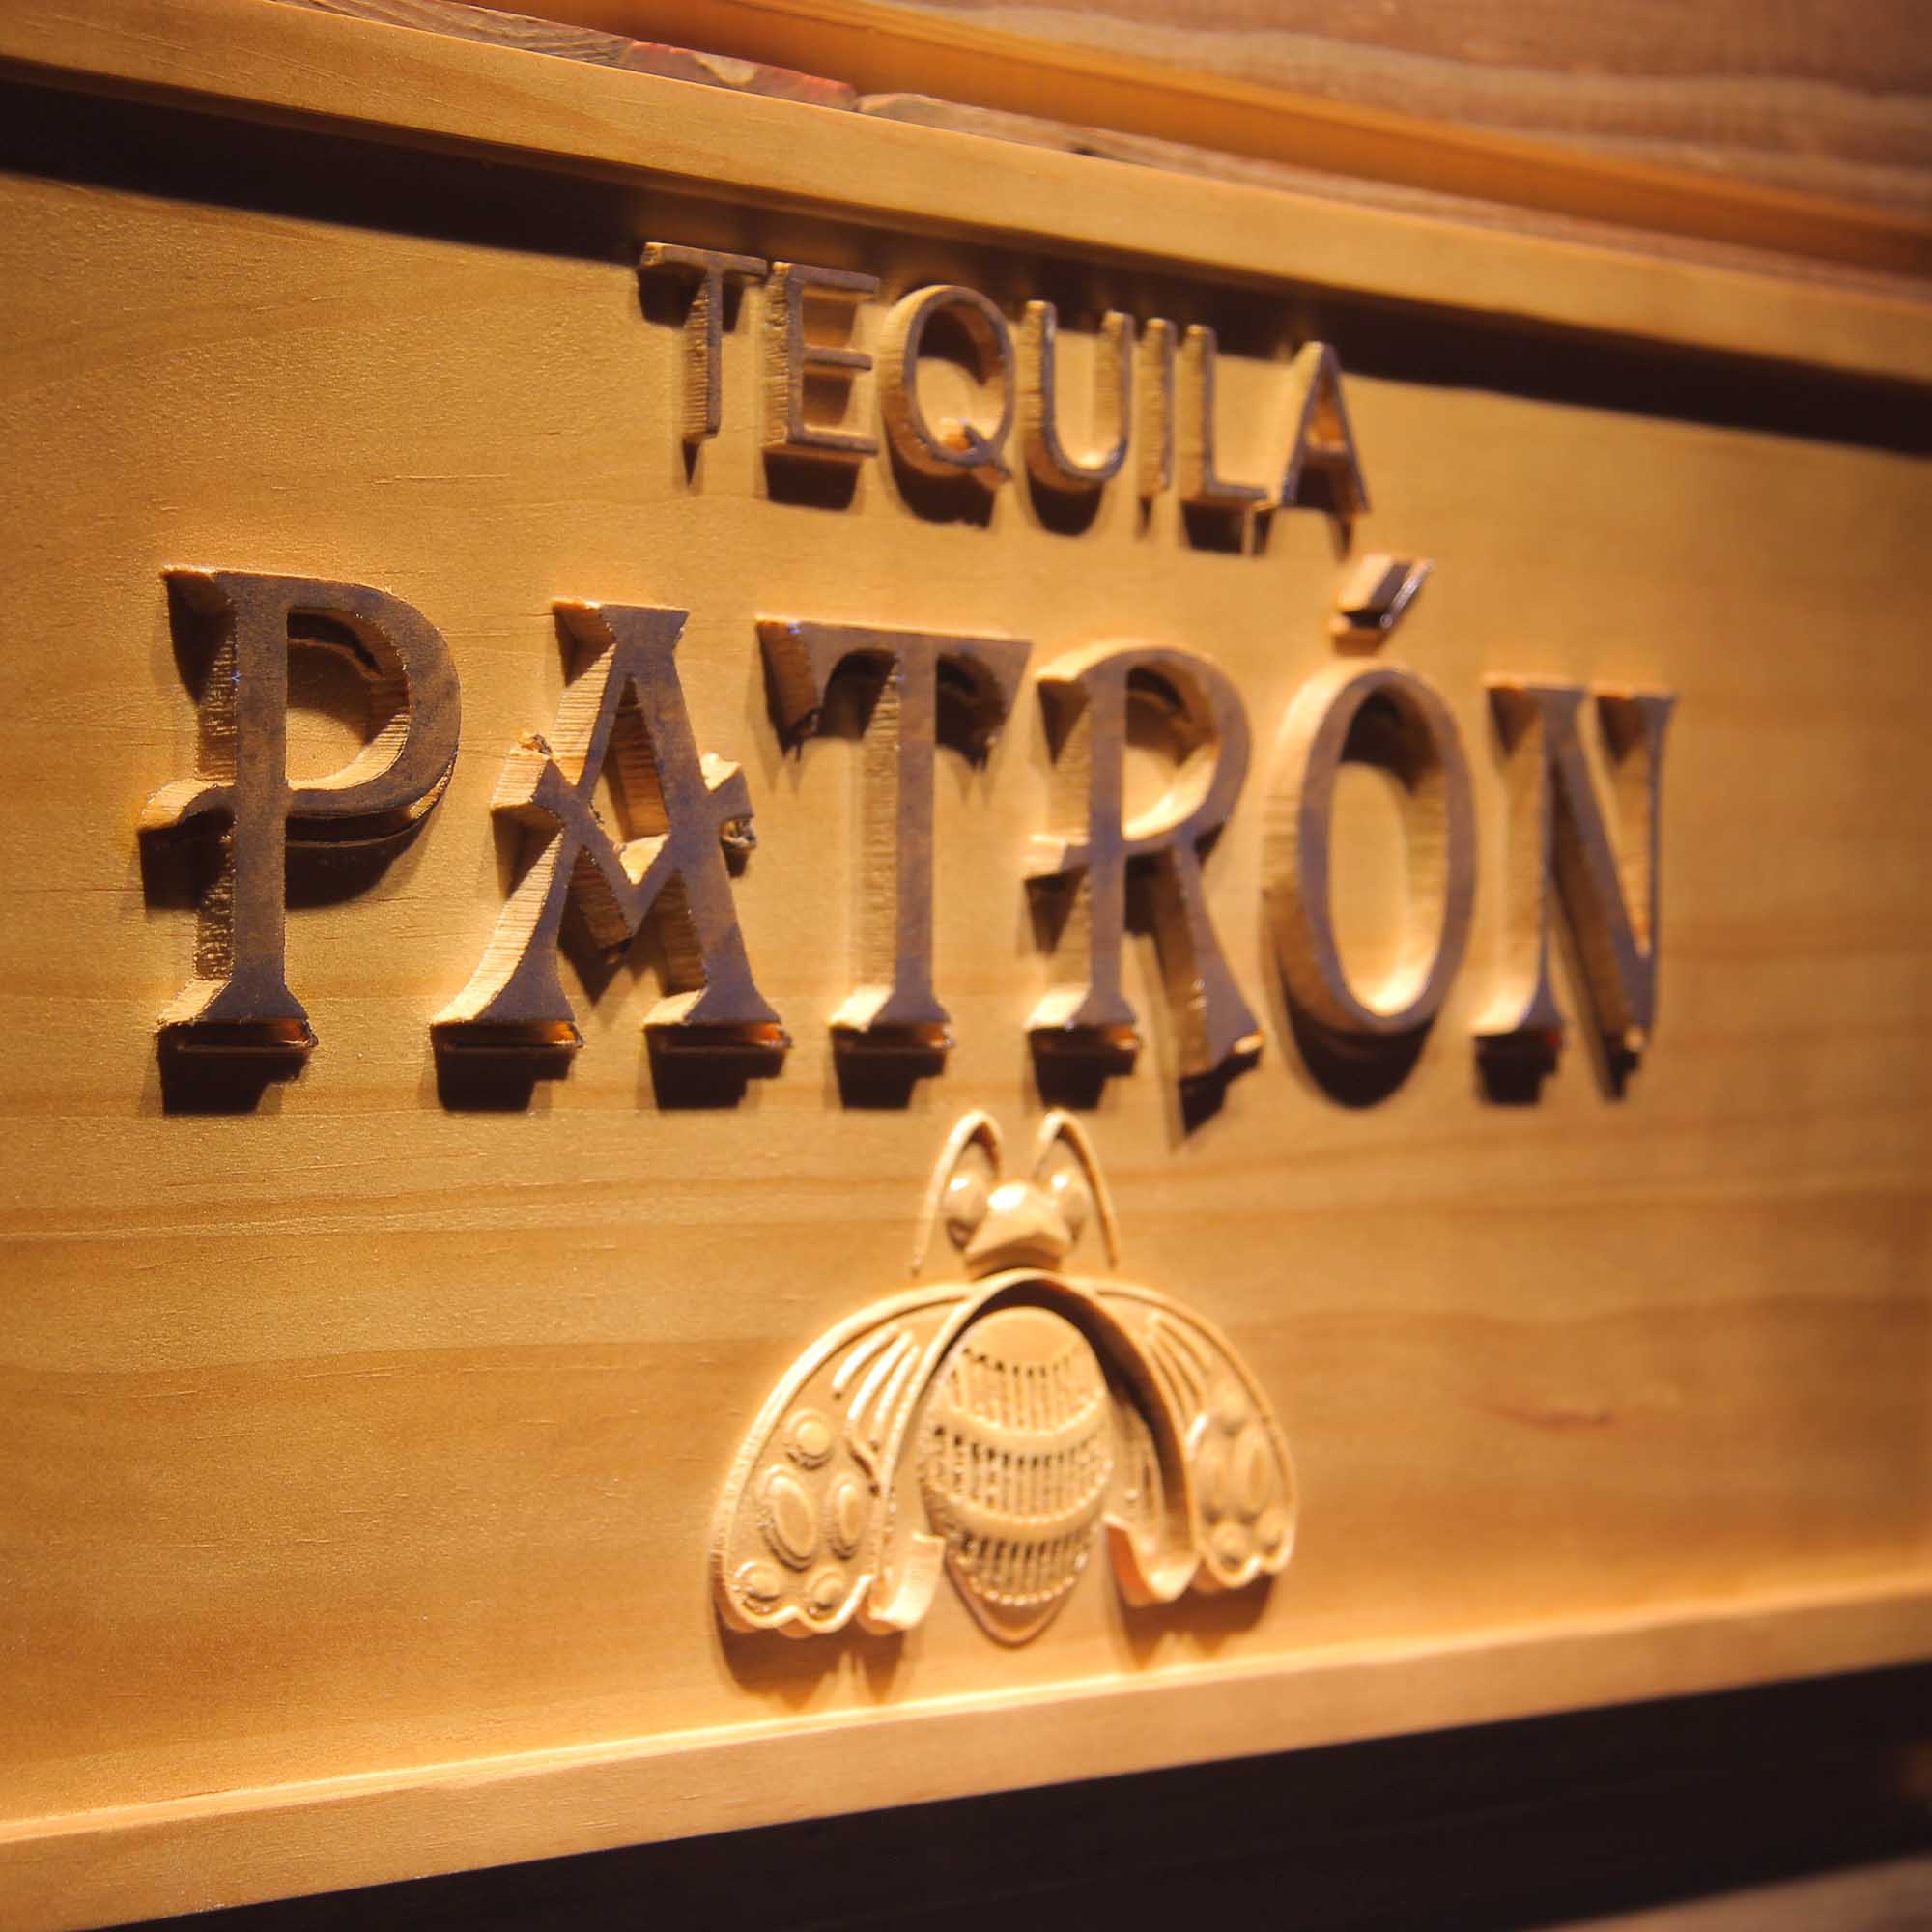 Tequila Patron 3D Wooden Engrave Sign